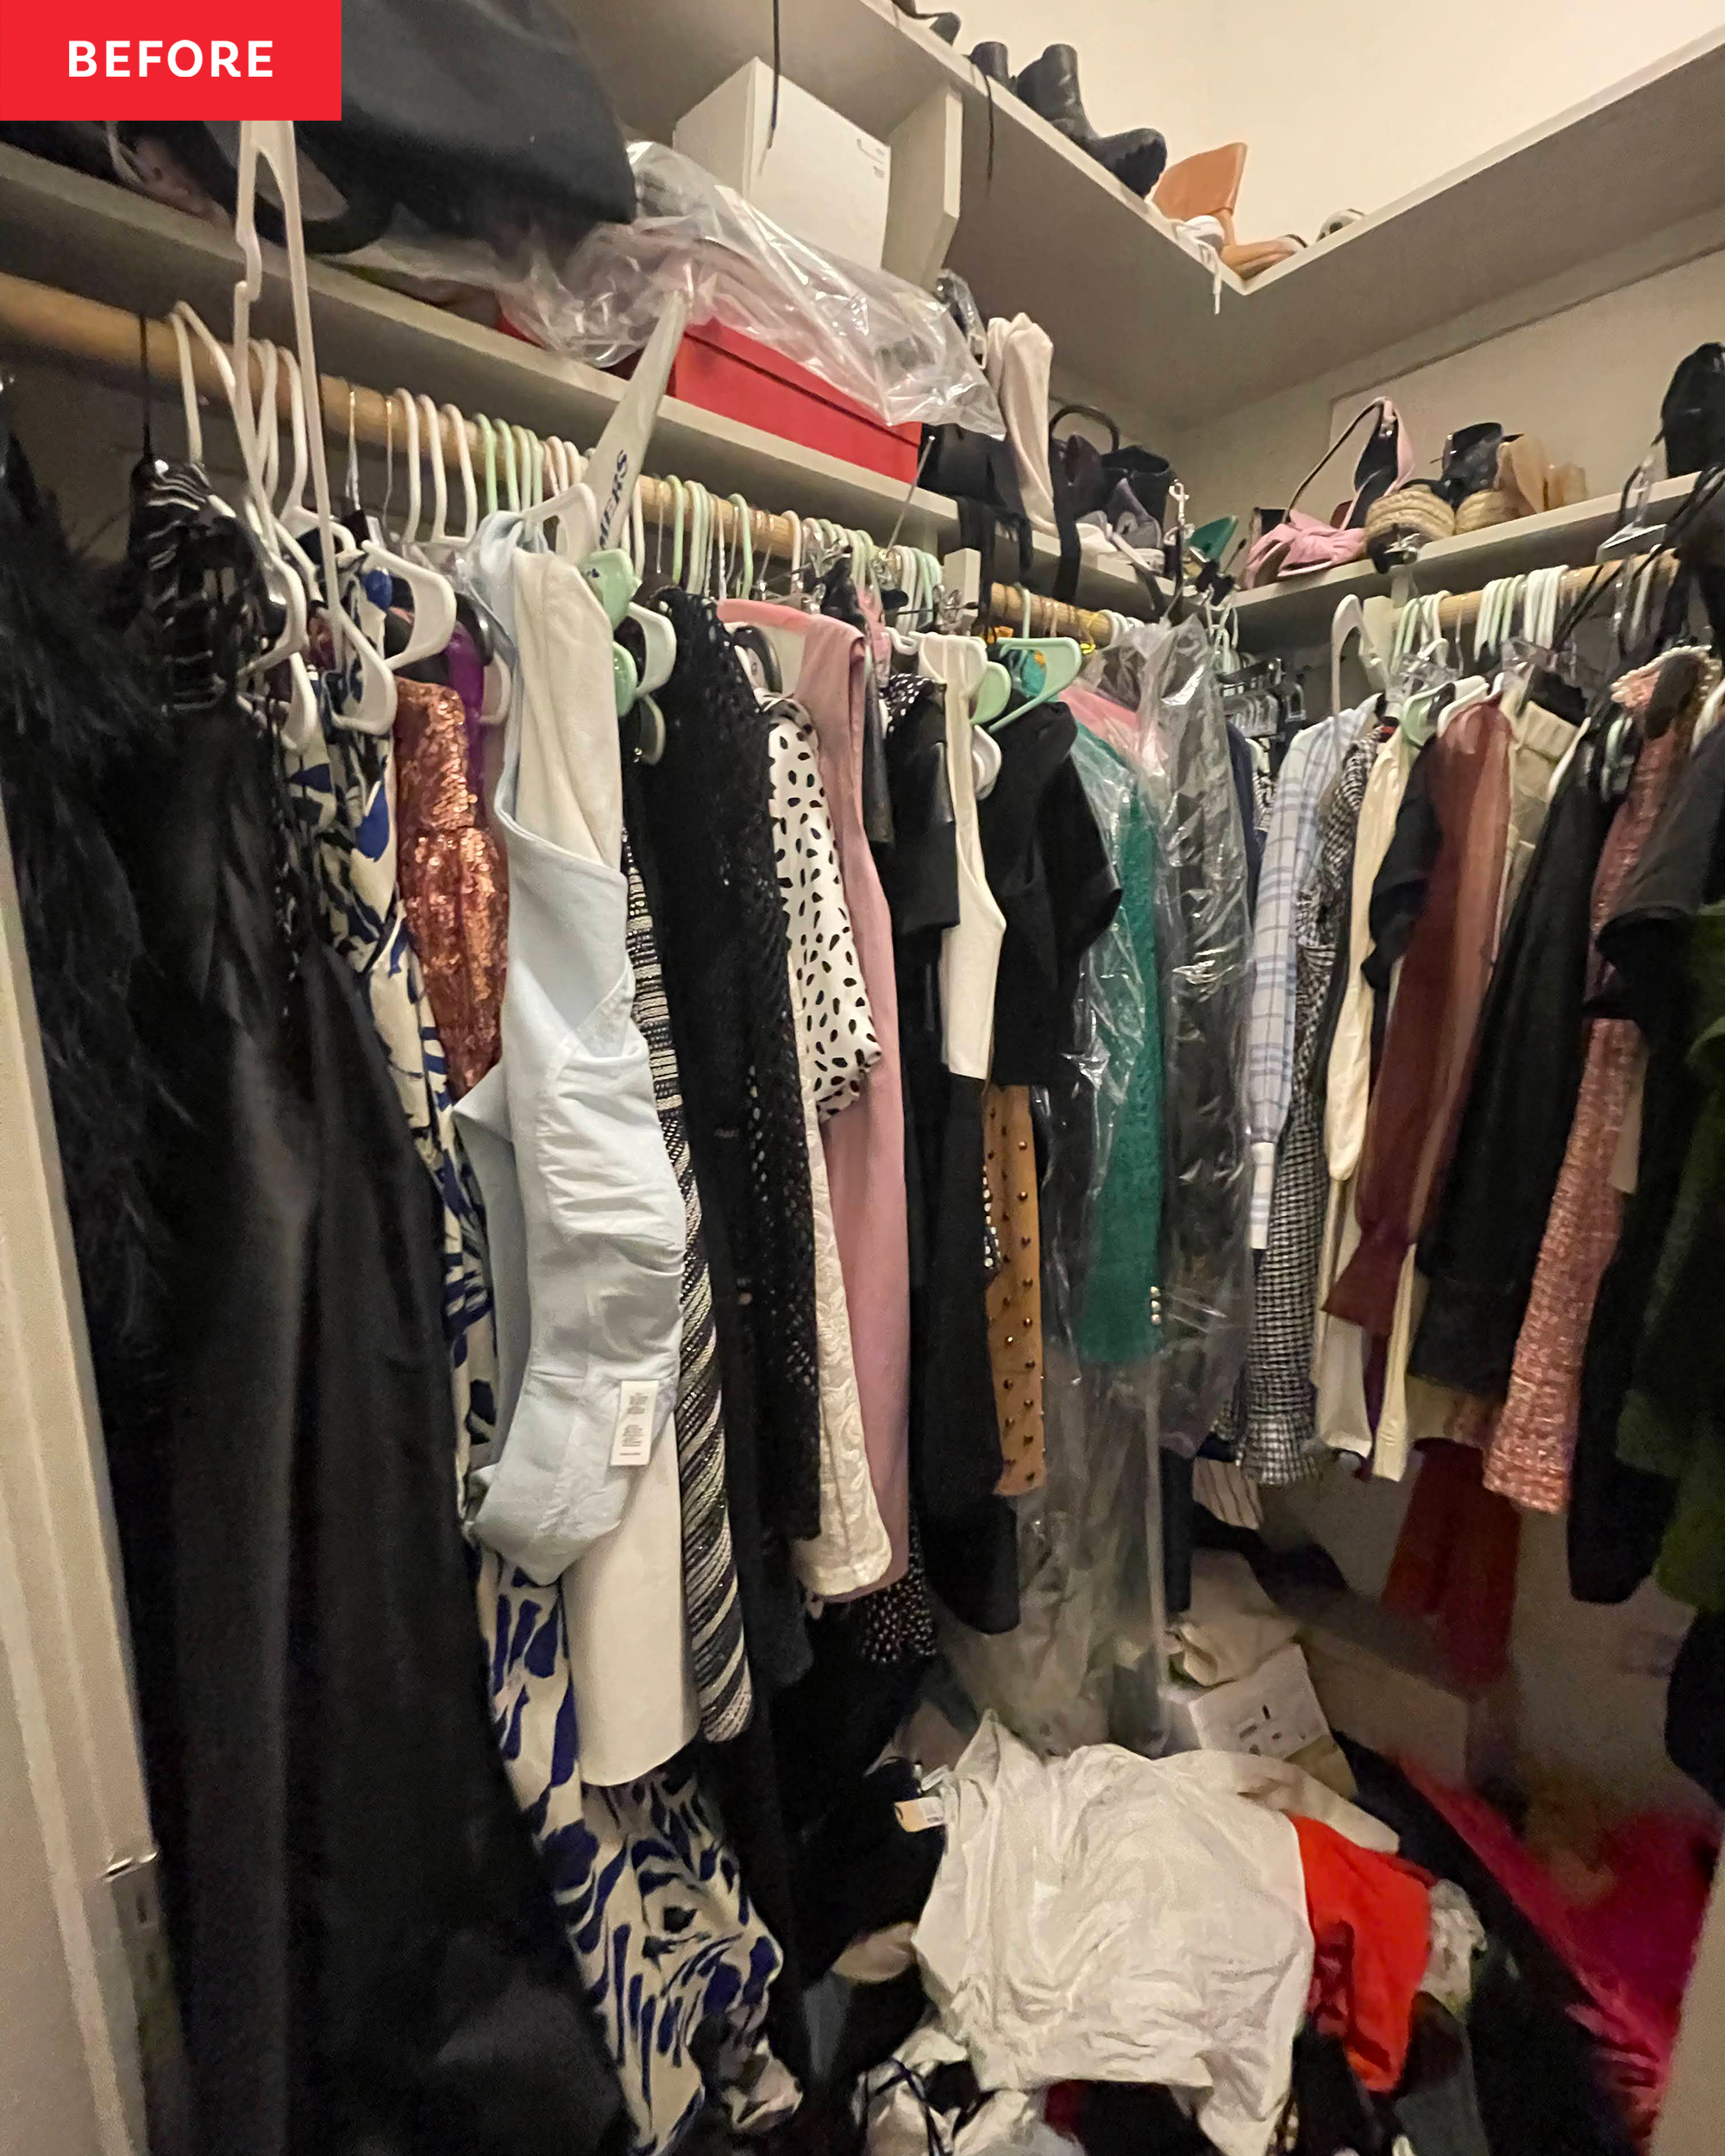 https://cdn.apartmenttherapy.info/image/upload/v1674083234/at/organize-clean/before-after/Layne_Brookshire_Client_Closet/LayneBrookshire_111372791_ClosetBefore.jpg